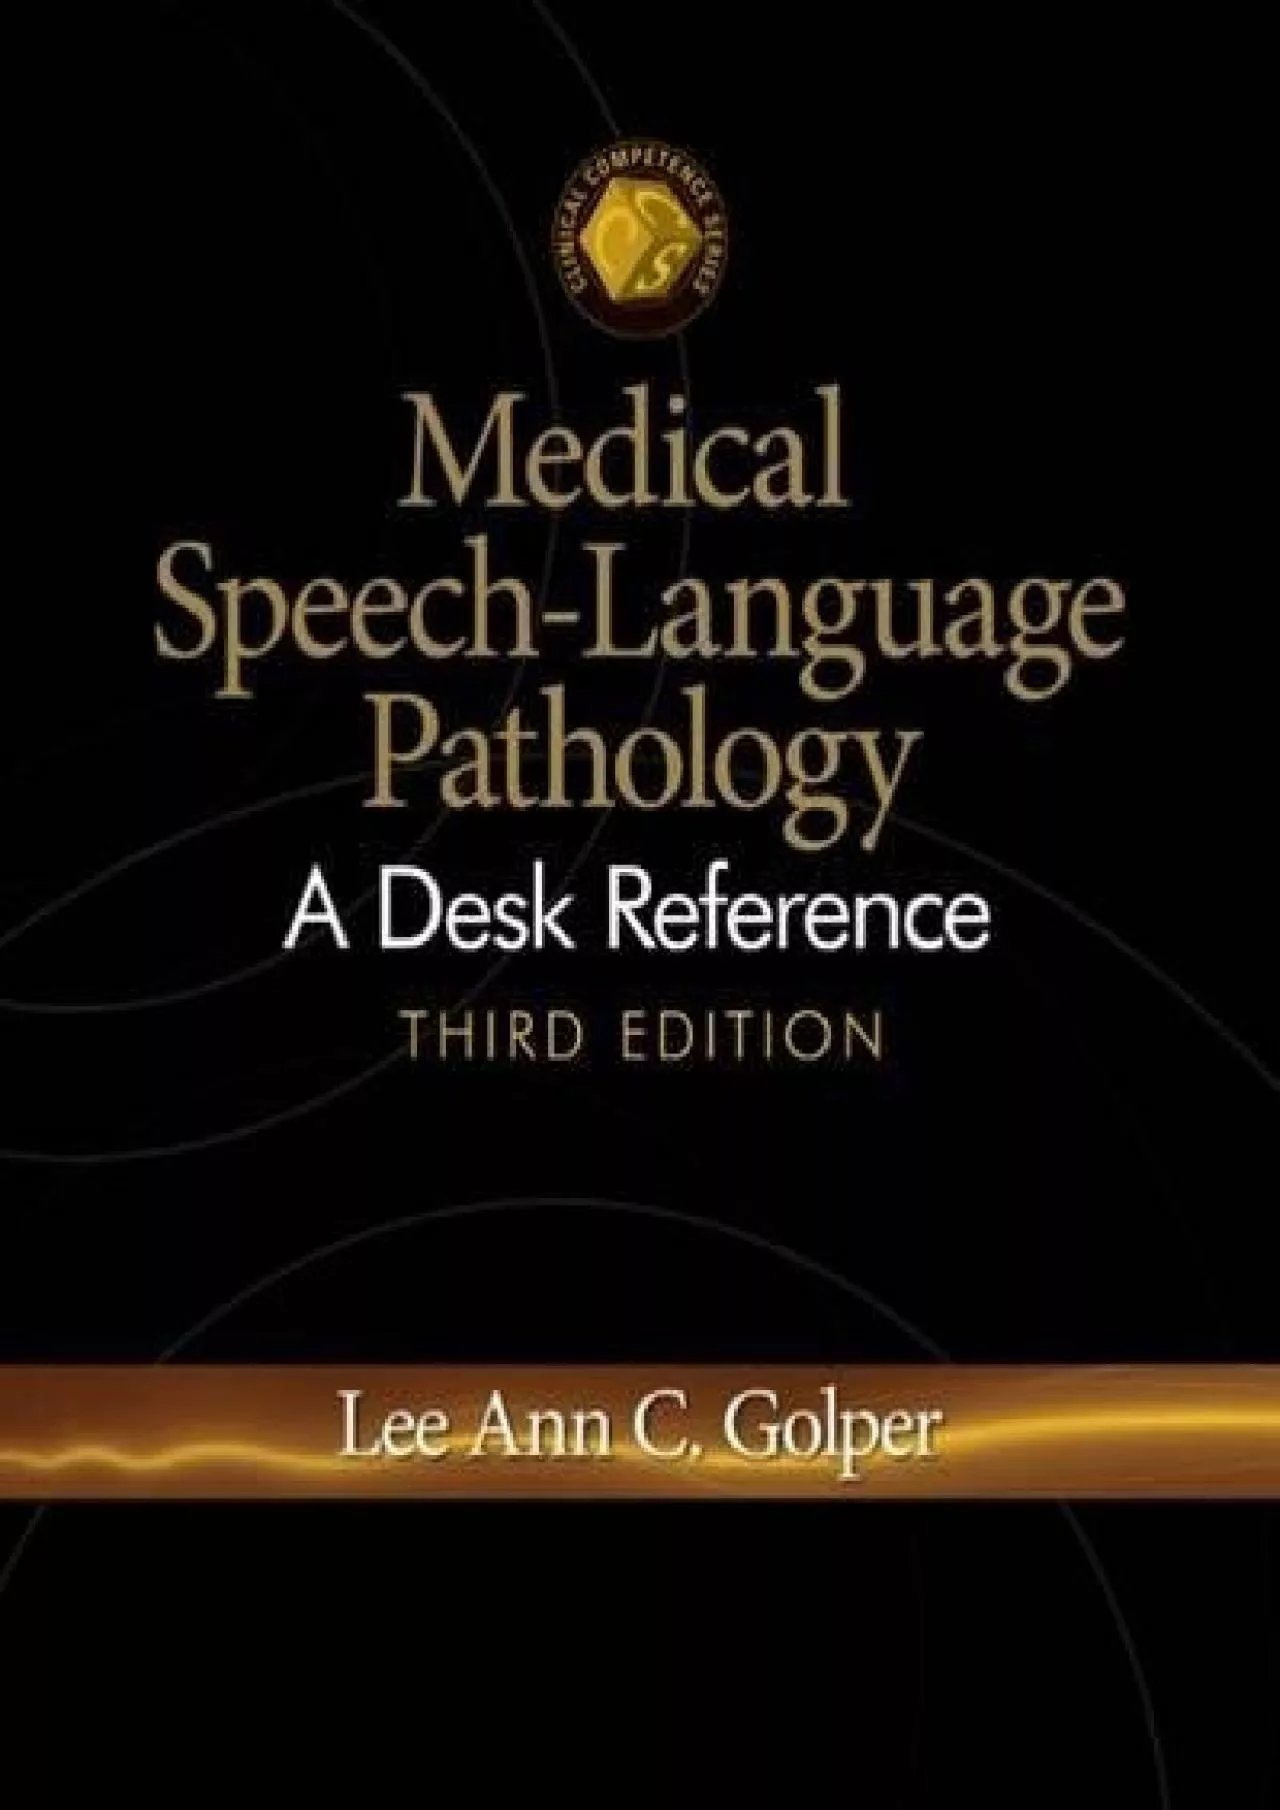 (DOWNLOAD)-Medical Speech-Language Pathology: A Desk Reference (Clinical Competence)